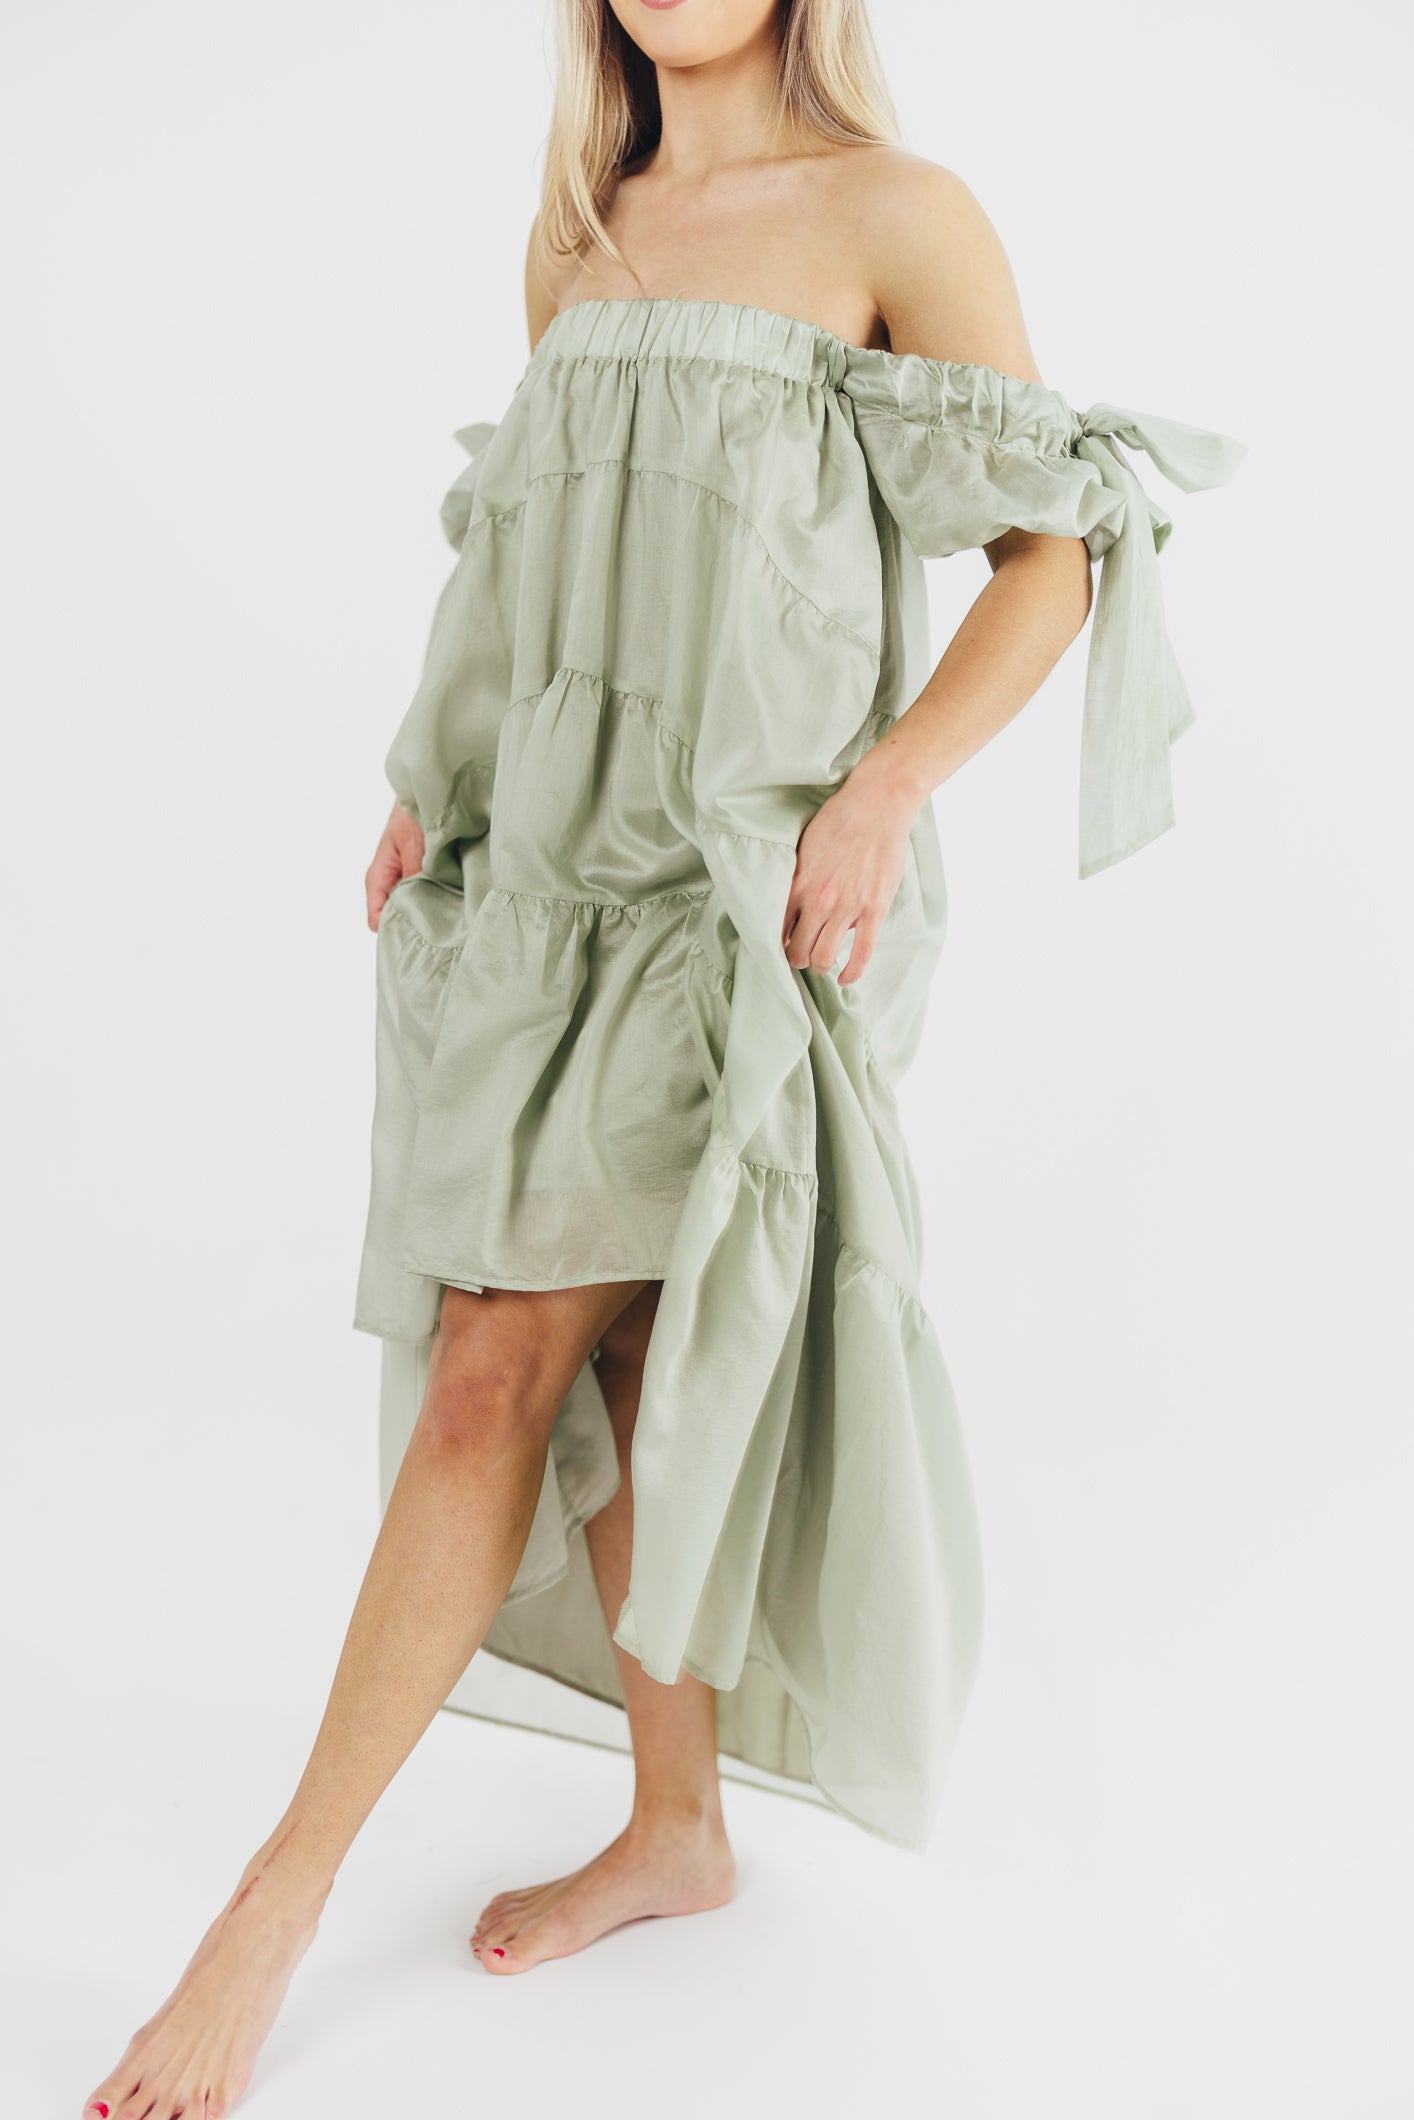 Loren Off-the-Shoulder Midi Dress with Bow Detail in Dusty Sage